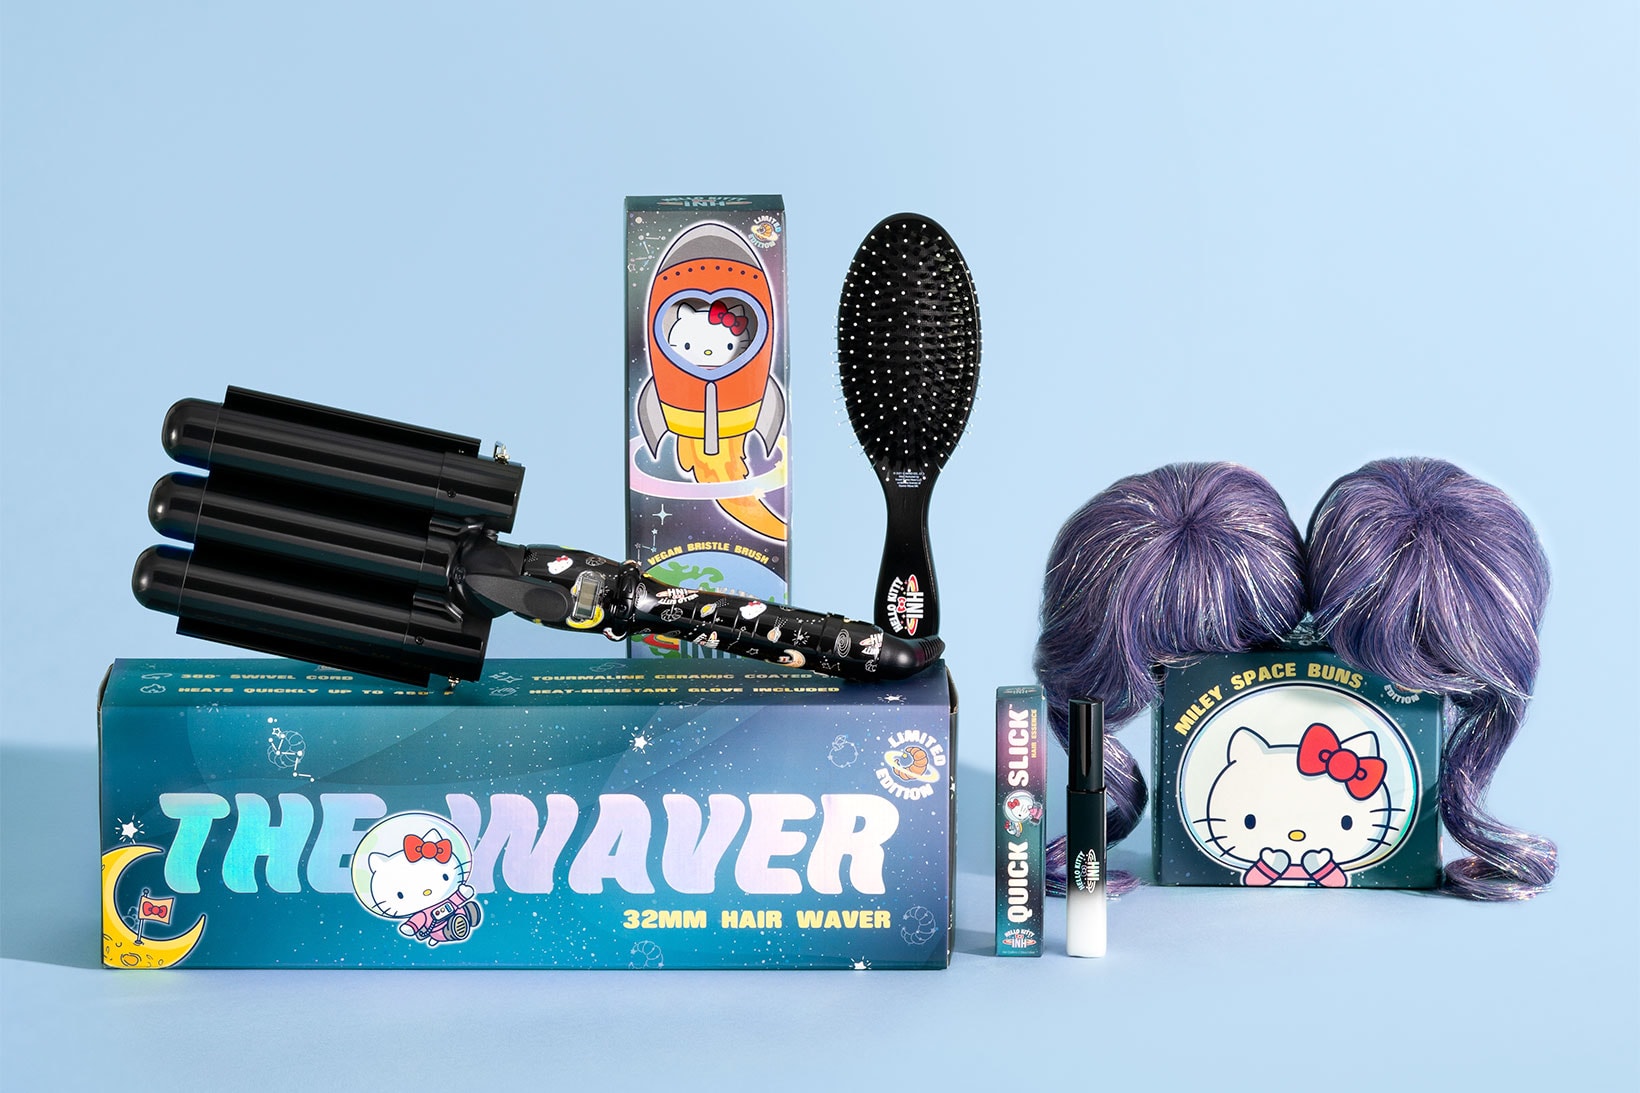 Insert Name Here x Hello Kitty Haircare collaborative set waver hair slick space buns